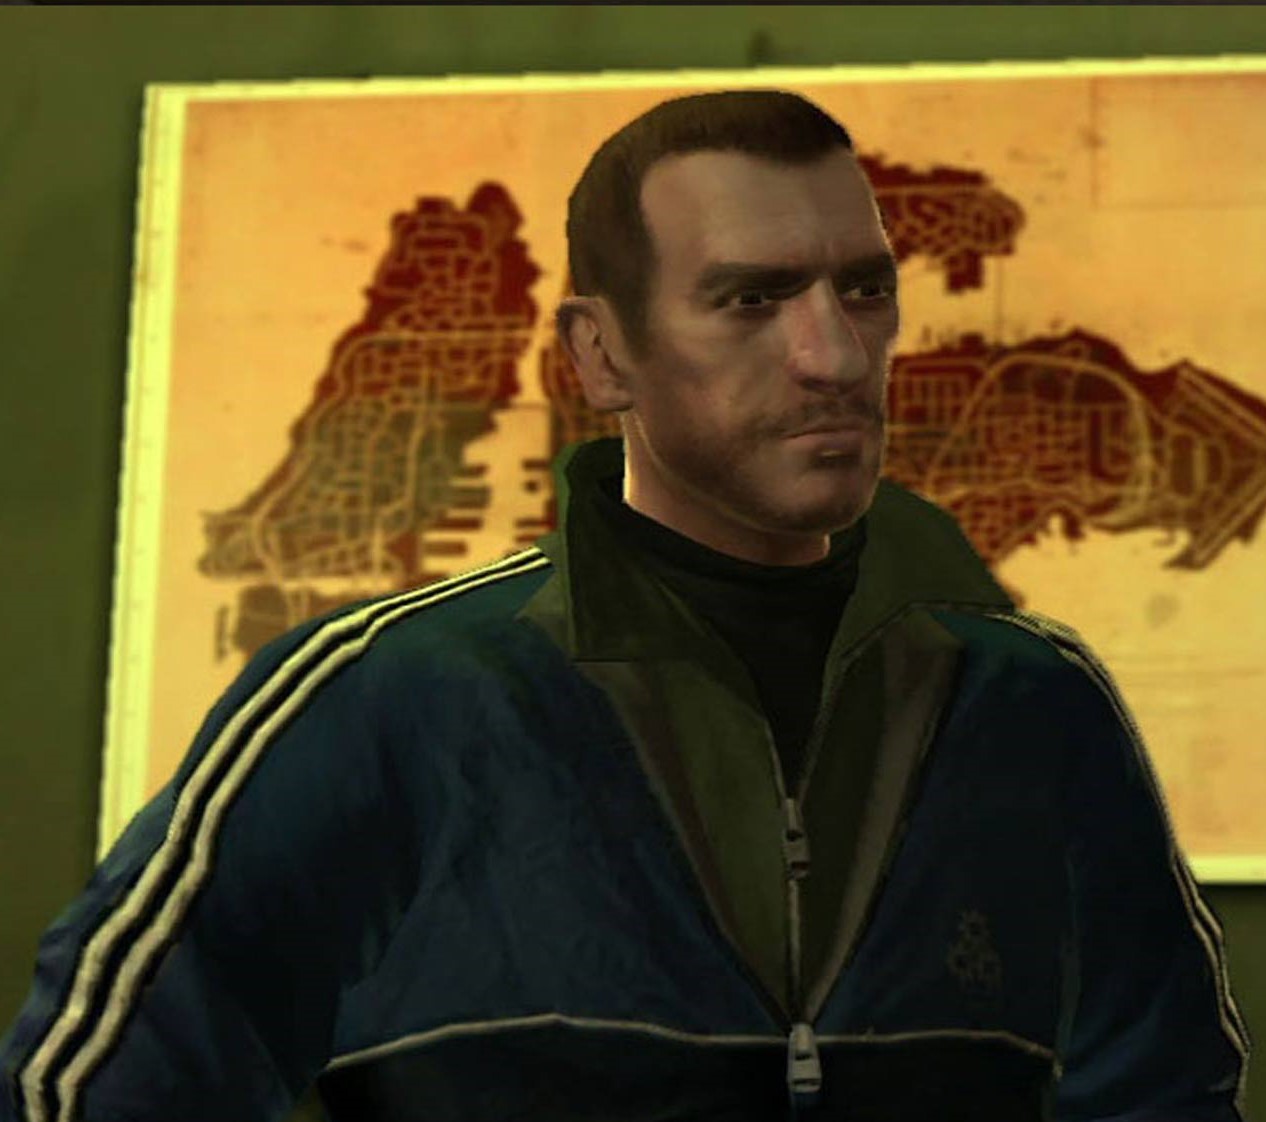 Grand Theft Auto 6: Memorable characters that fans want to see return in the next GTA title - THE SPORTS ROOM